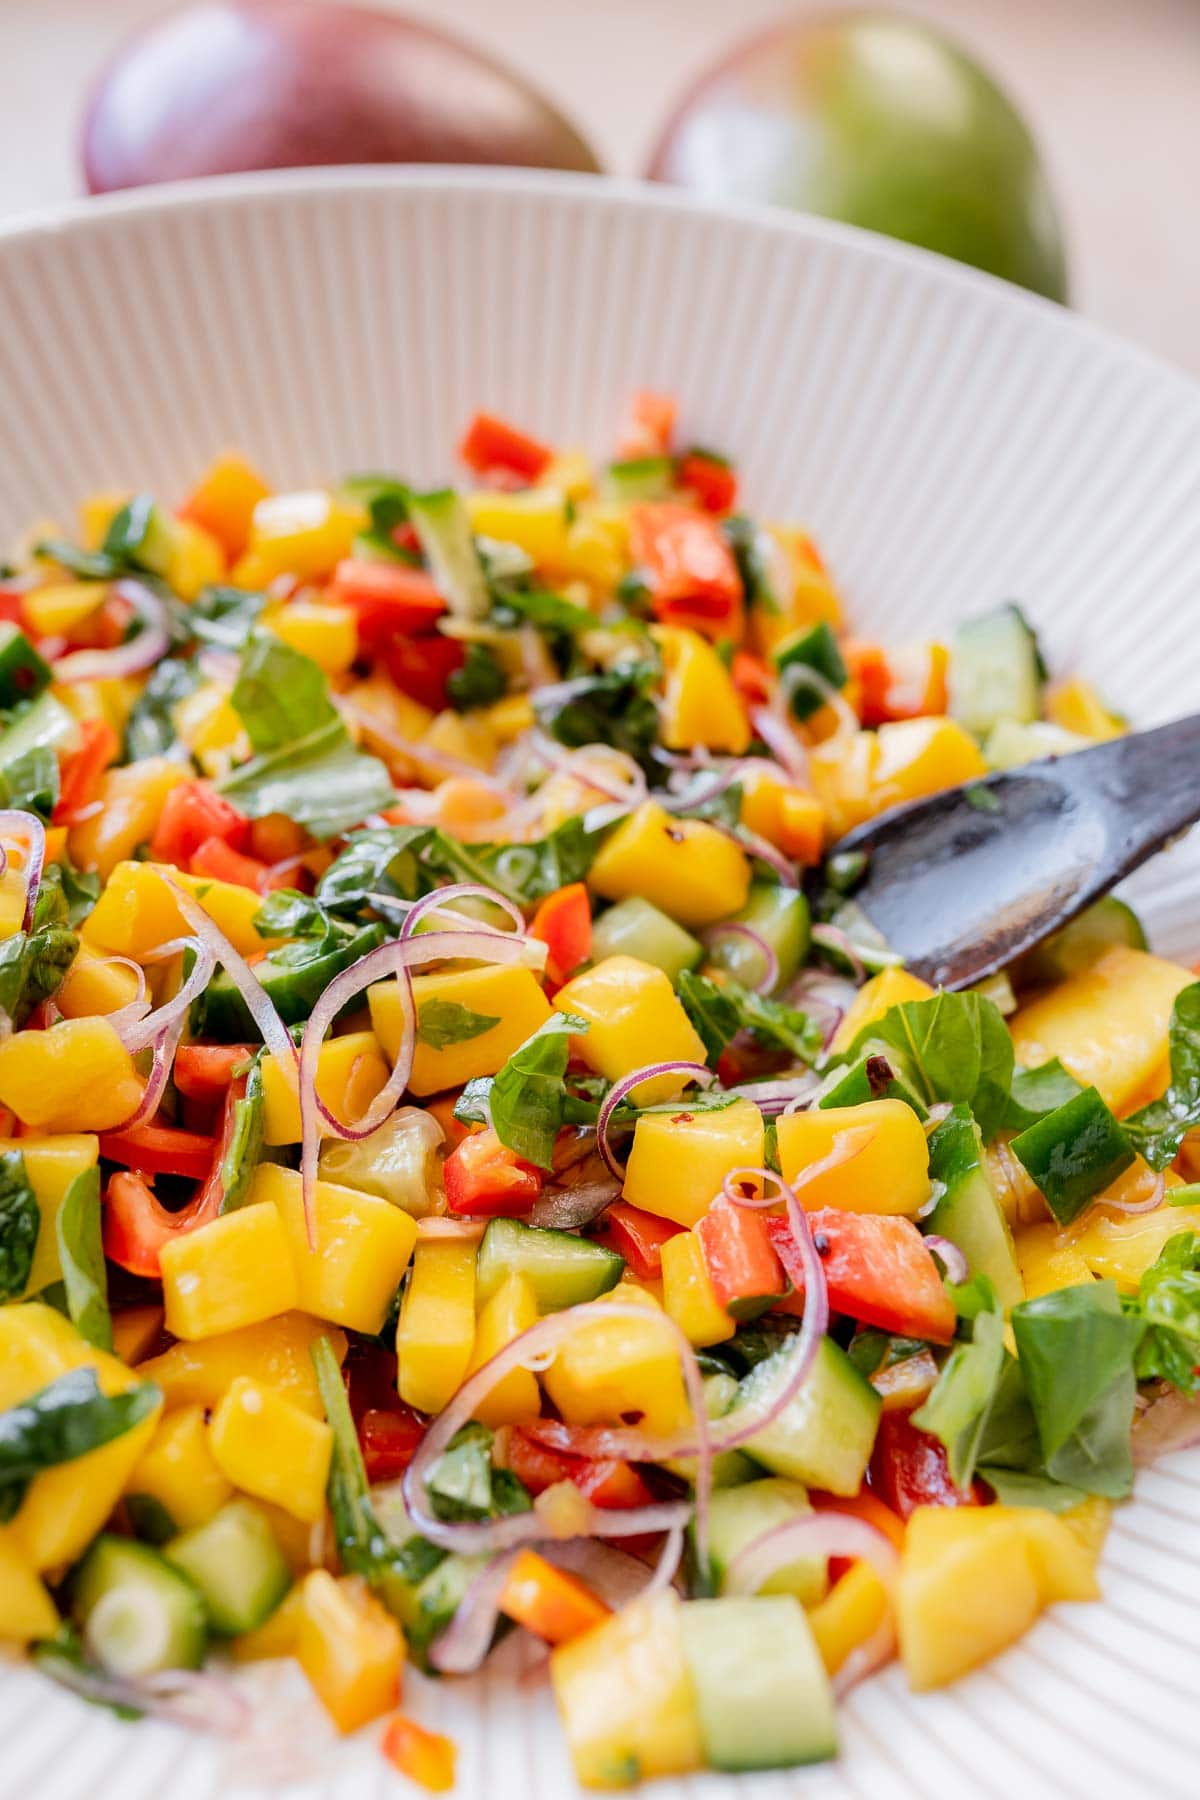 A wooden spoon rests on the rim of a large white bowl filled with mango salad.